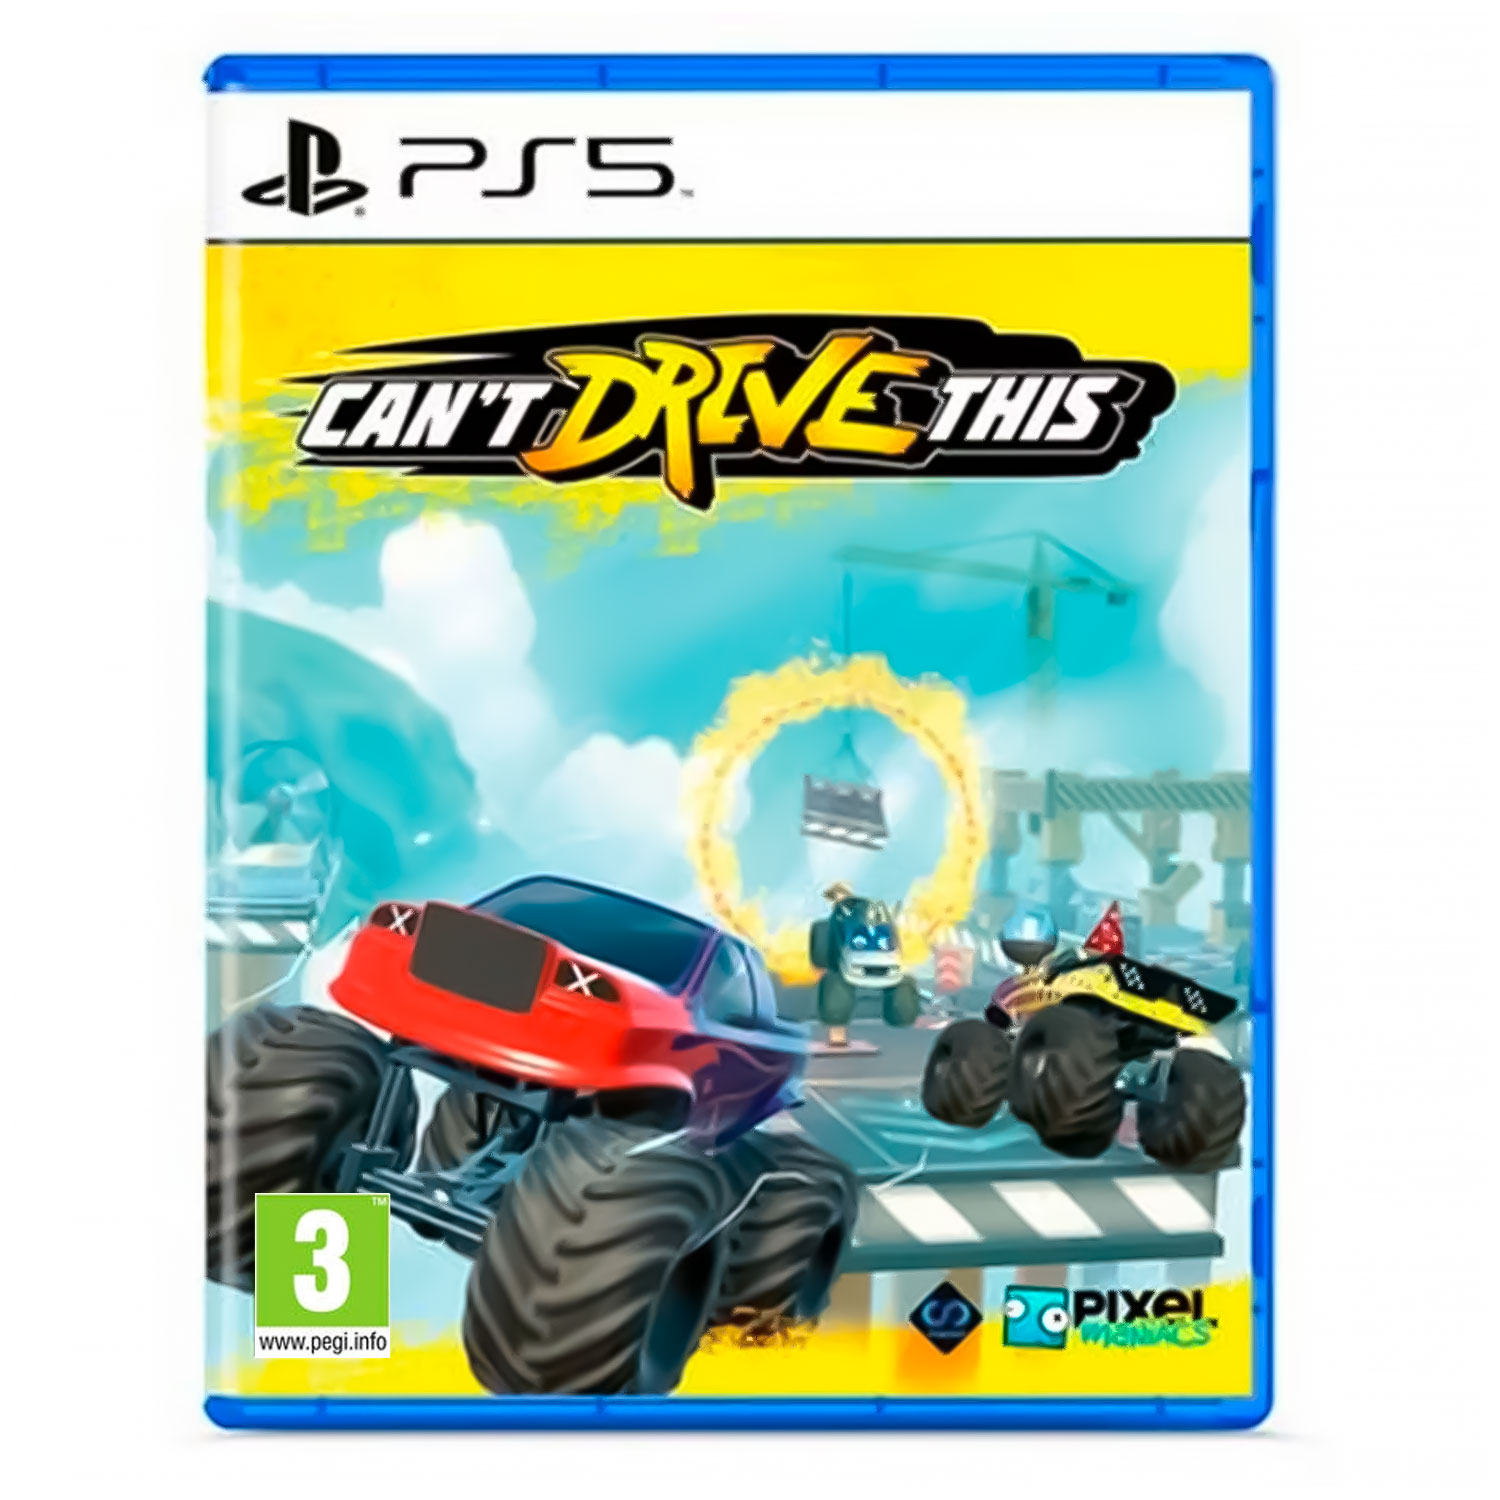 Jogo Can't Drive This para PS5